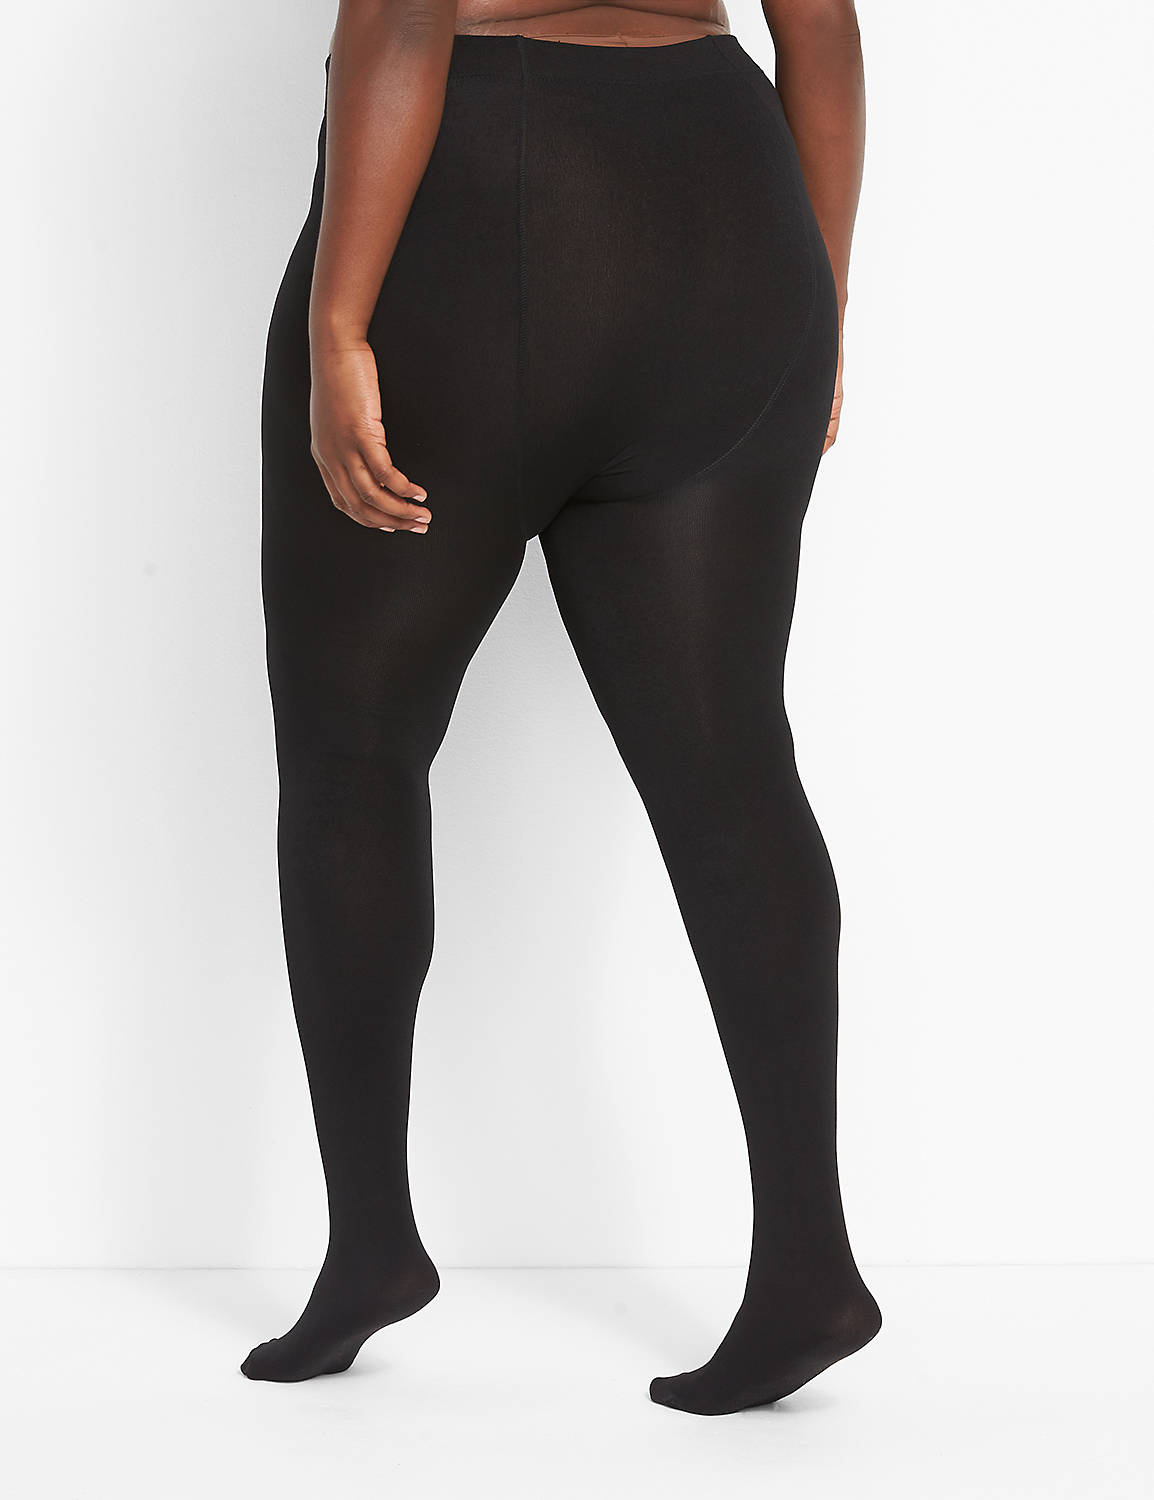 Fleece-Lined Tights - 80D - Super Opaque Product Image 2